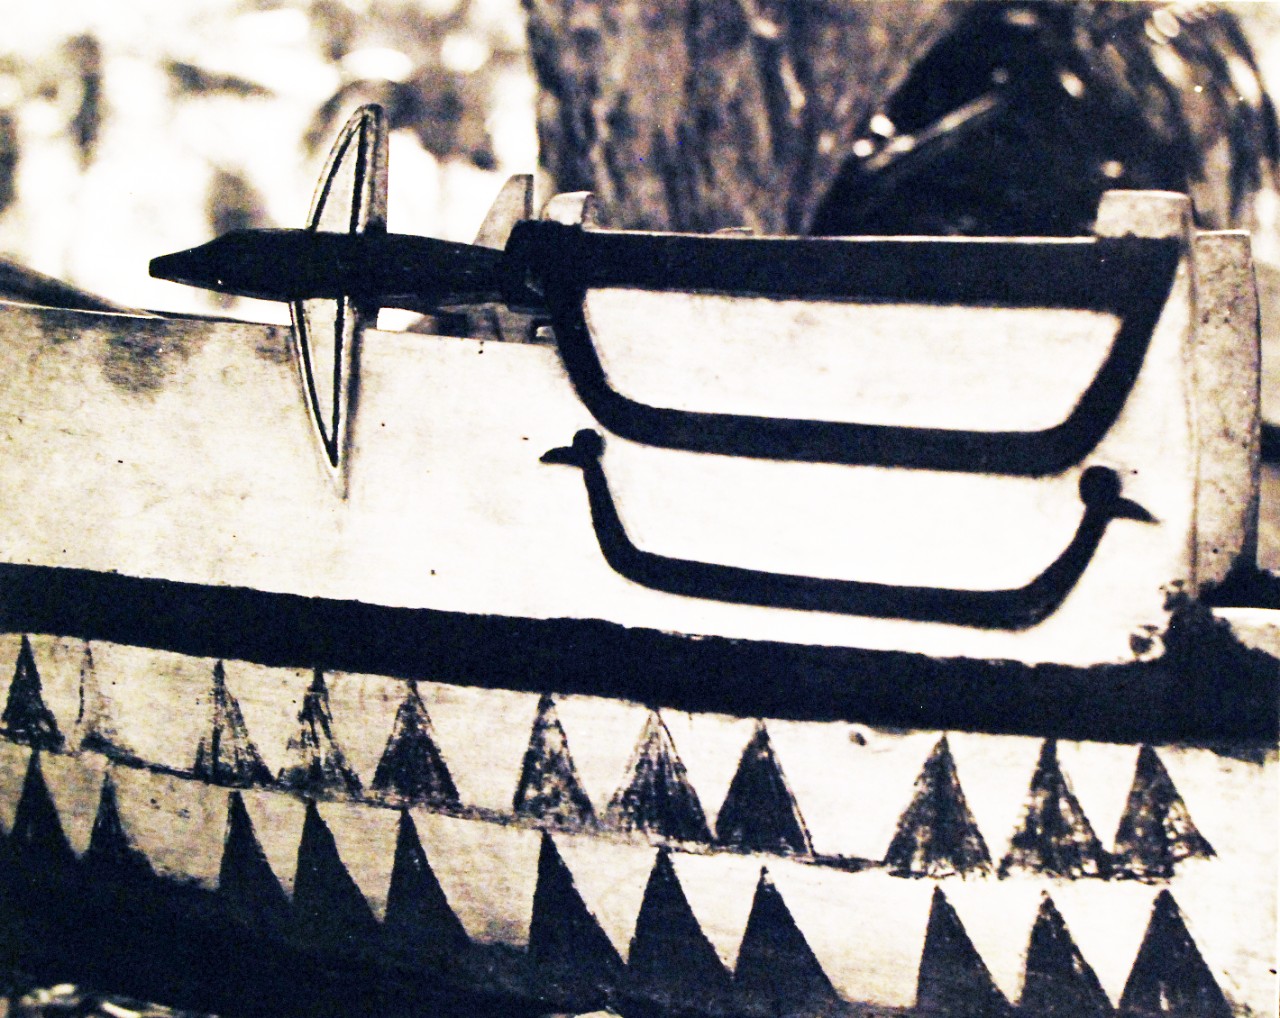 80-G-216095: Guadalcanal Island, Solomon Islands.  Native designs on prow of war canoe use motif of flying fish and triangles symbolizing sun pattern.  These designs are distinctive of Malaita, the most populated of the Solomon Islands.  It was in canoes like this that many navy pilots were rescued by natives during early days of the Battle of Guadalcanal.  Photograph released February 6, 1944.  U.S. Navy Photograph, now in the collections of the National Archives.  (2016/11/25).